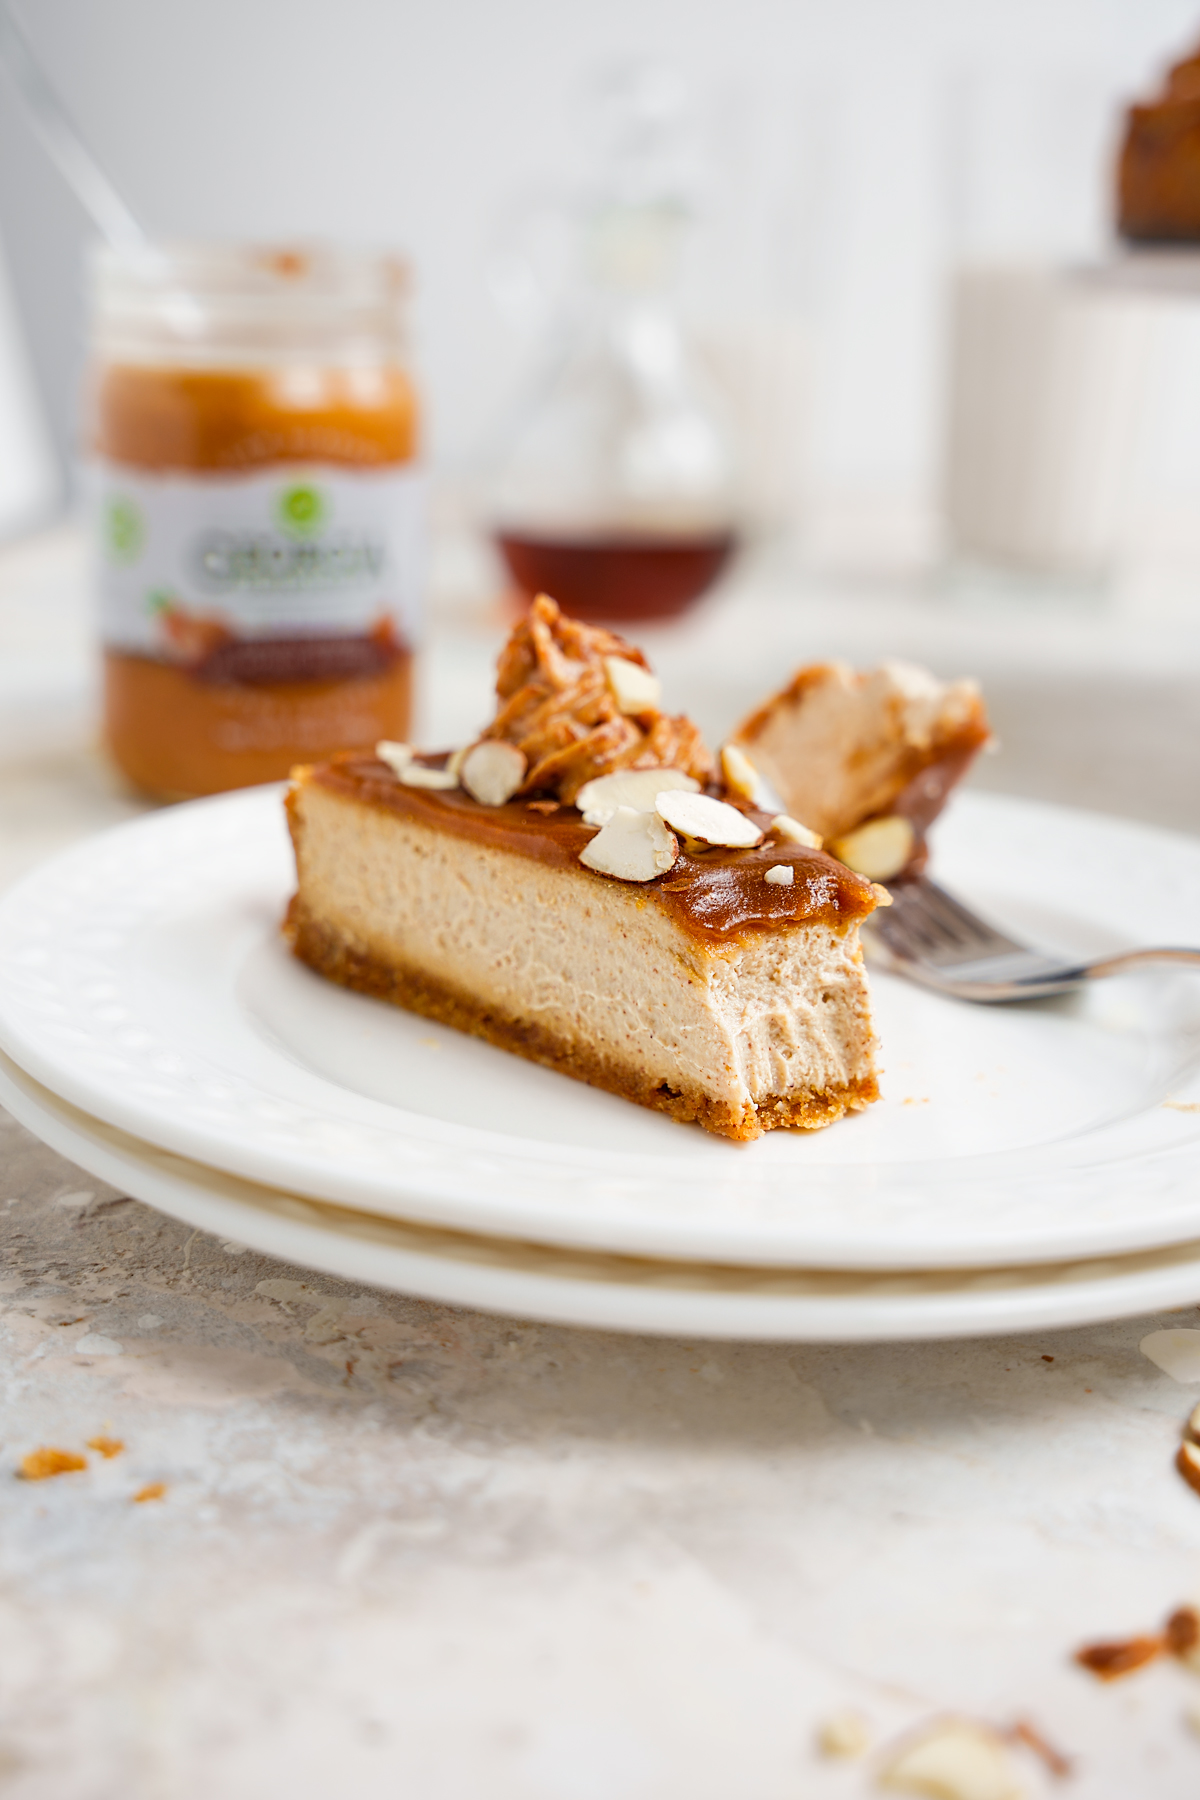 a slice of the refined sugar-free vegan cheesecake with a bite taken out to show the perfect texture.